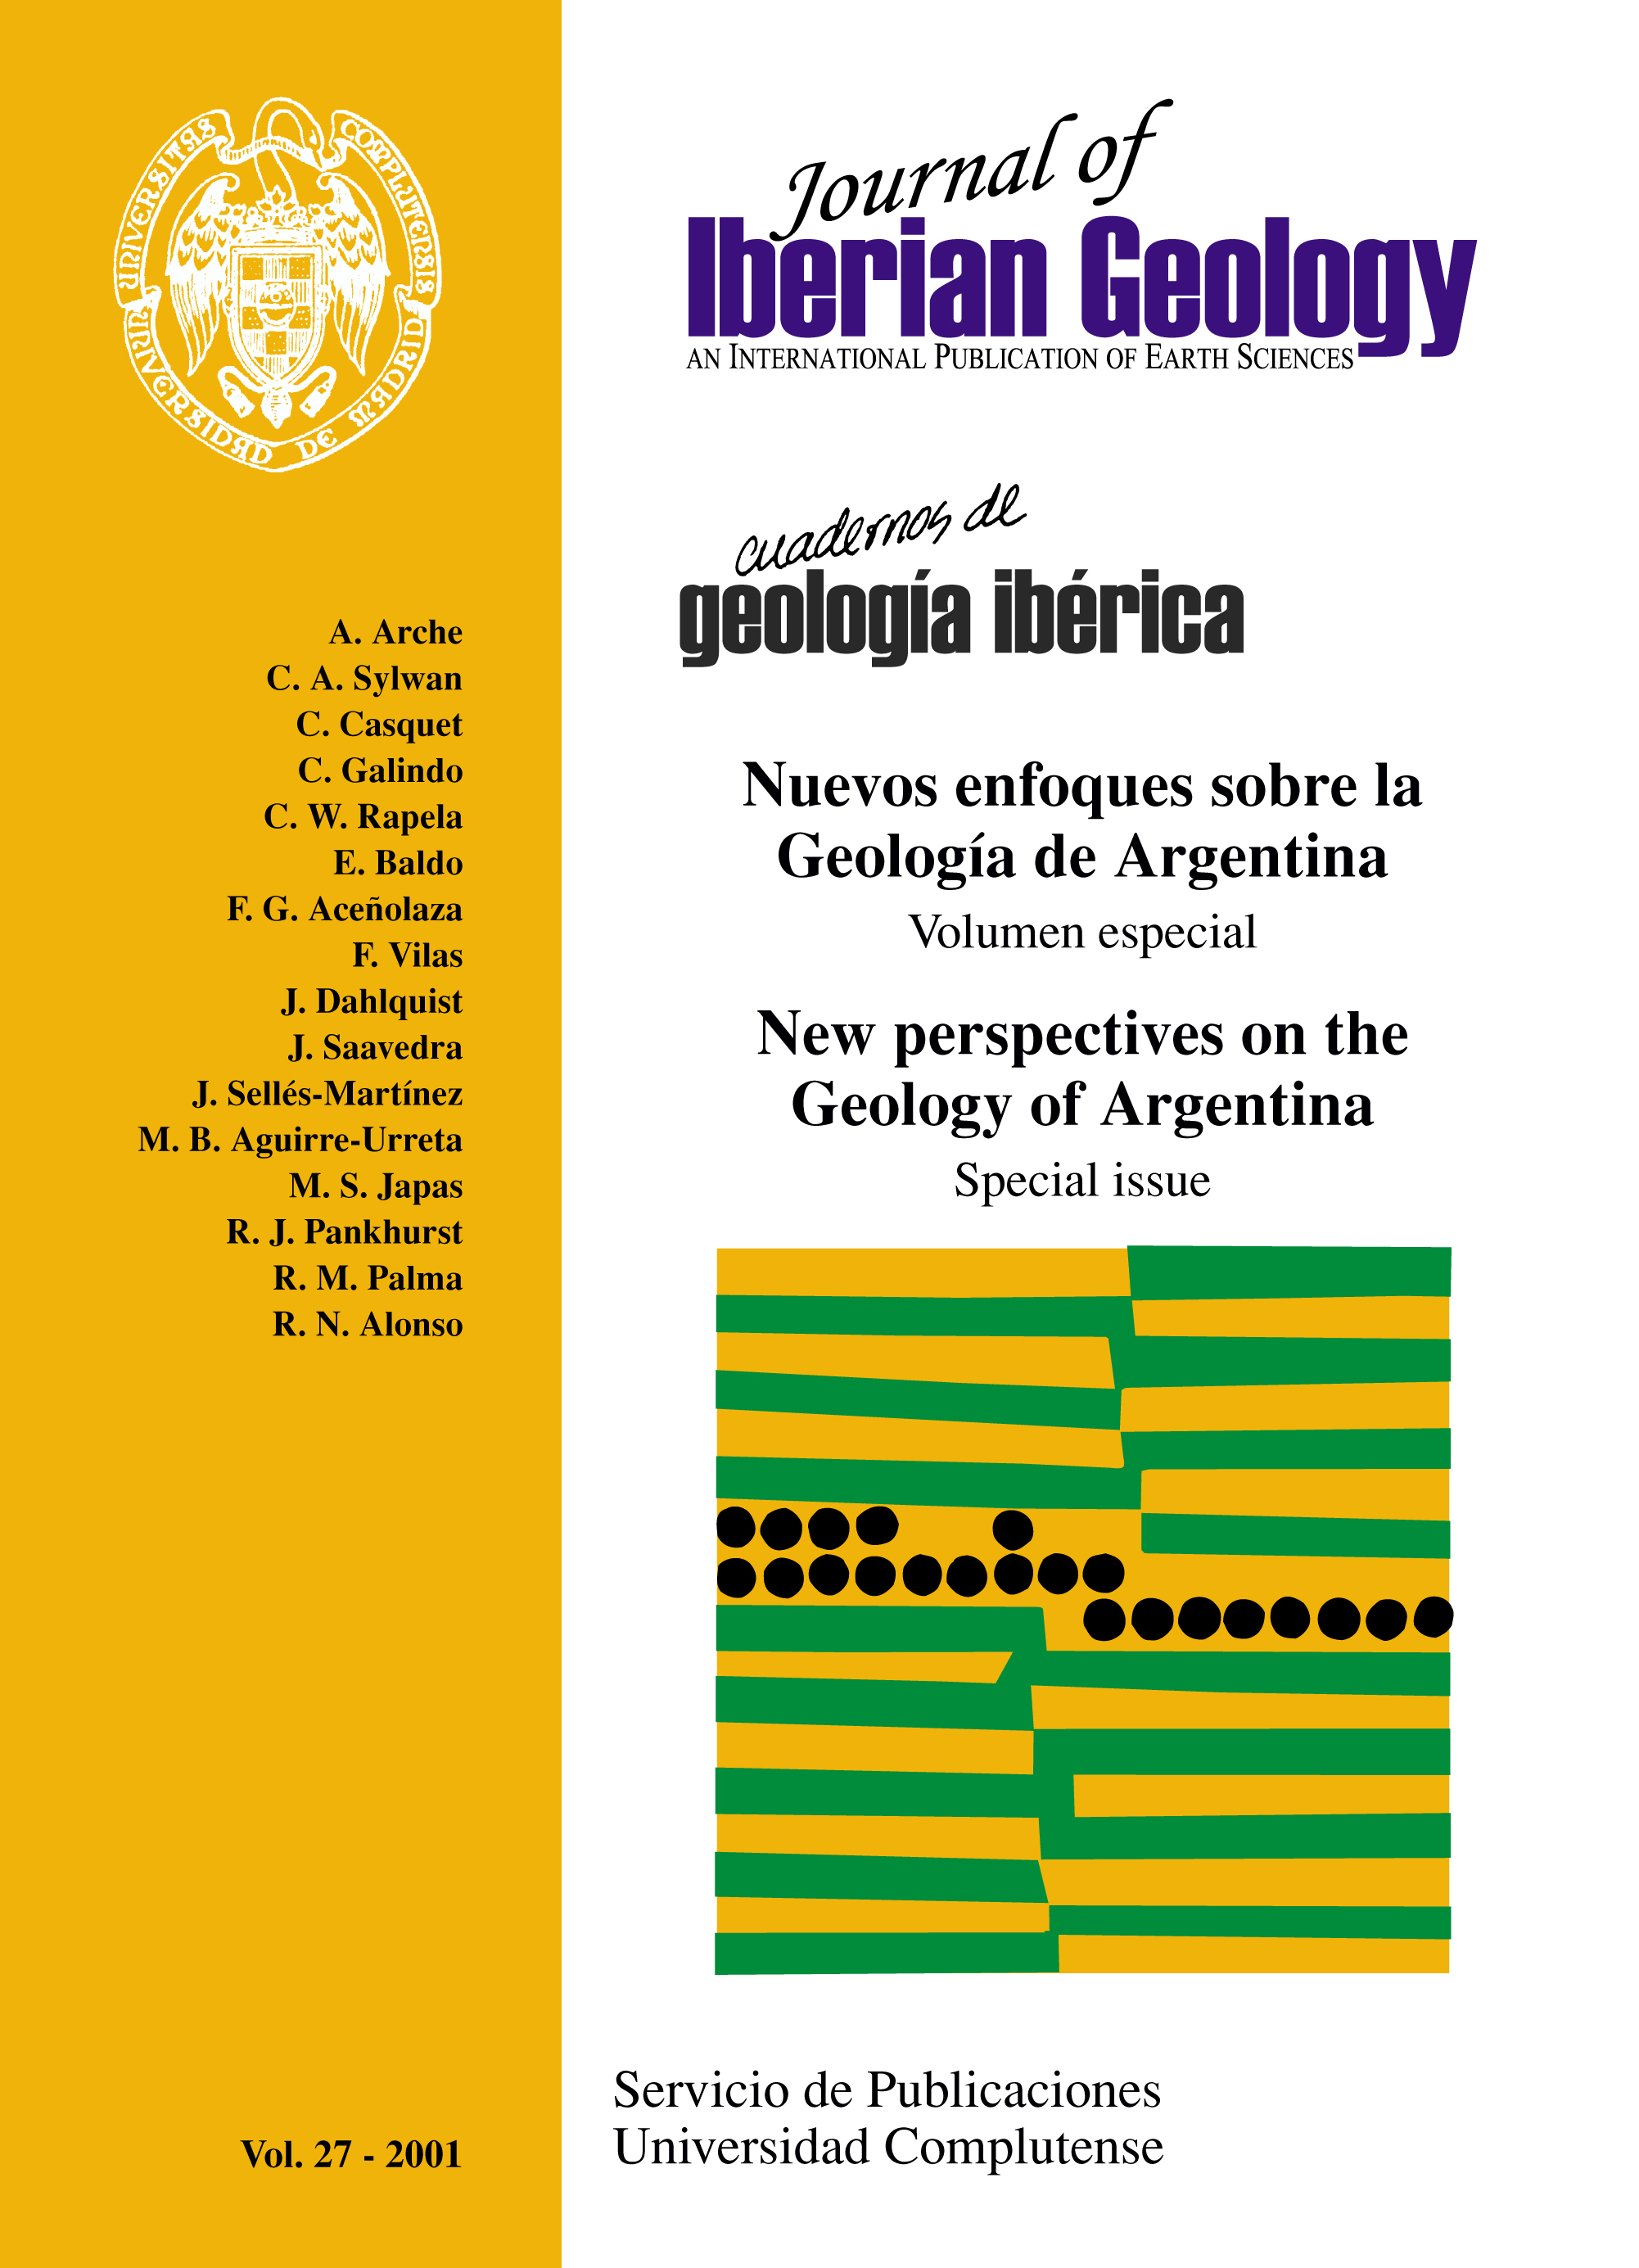 					View Vol. 27 (2001): New perspectives on the Geology of Argentina
				